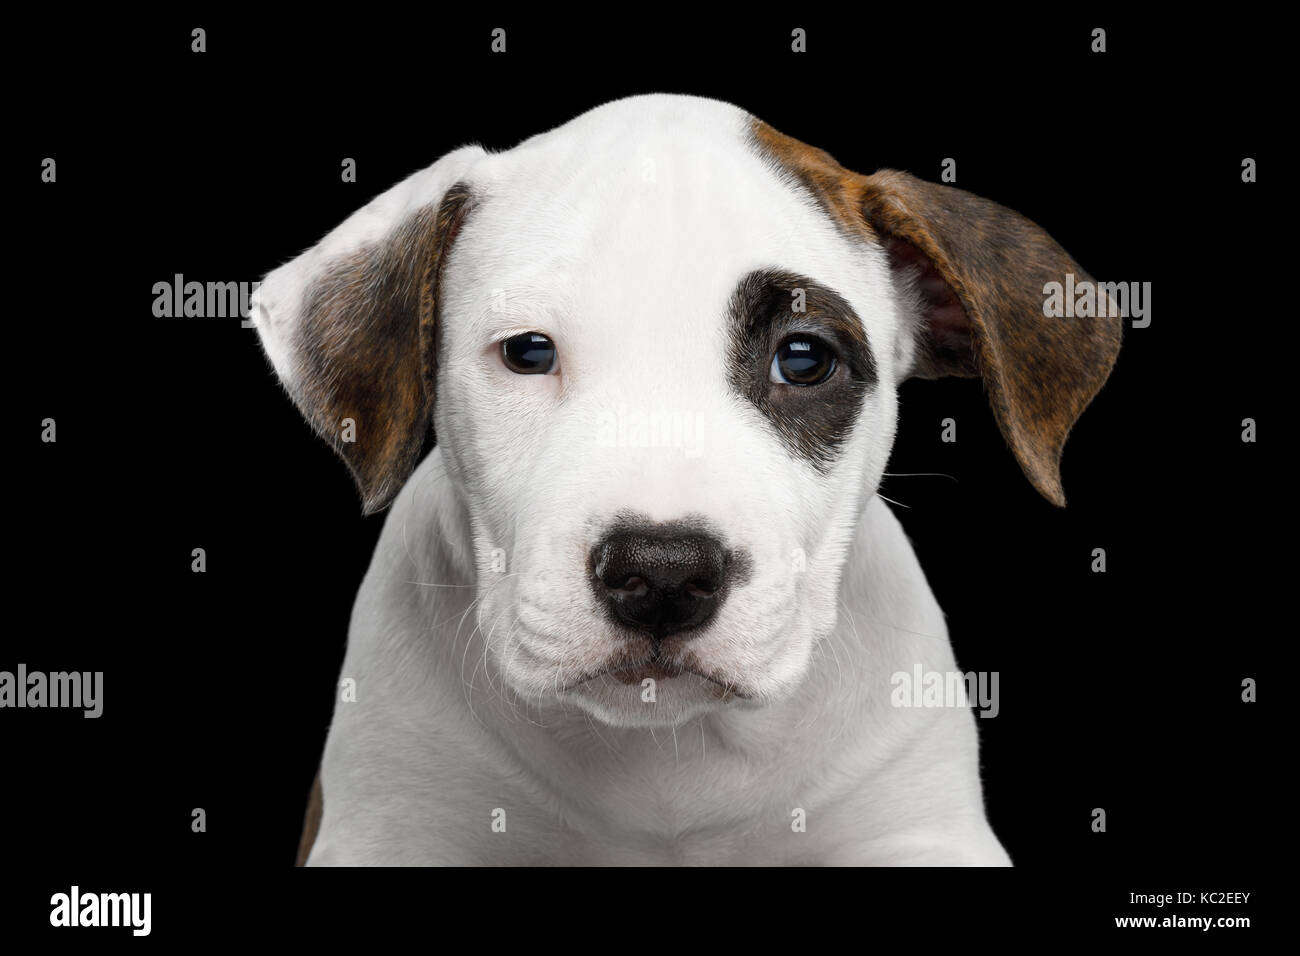 Close-up Portrait of an American Staffordshire Terrier Puppy, looking at camera on Isolated Black background, front view Stock Photo